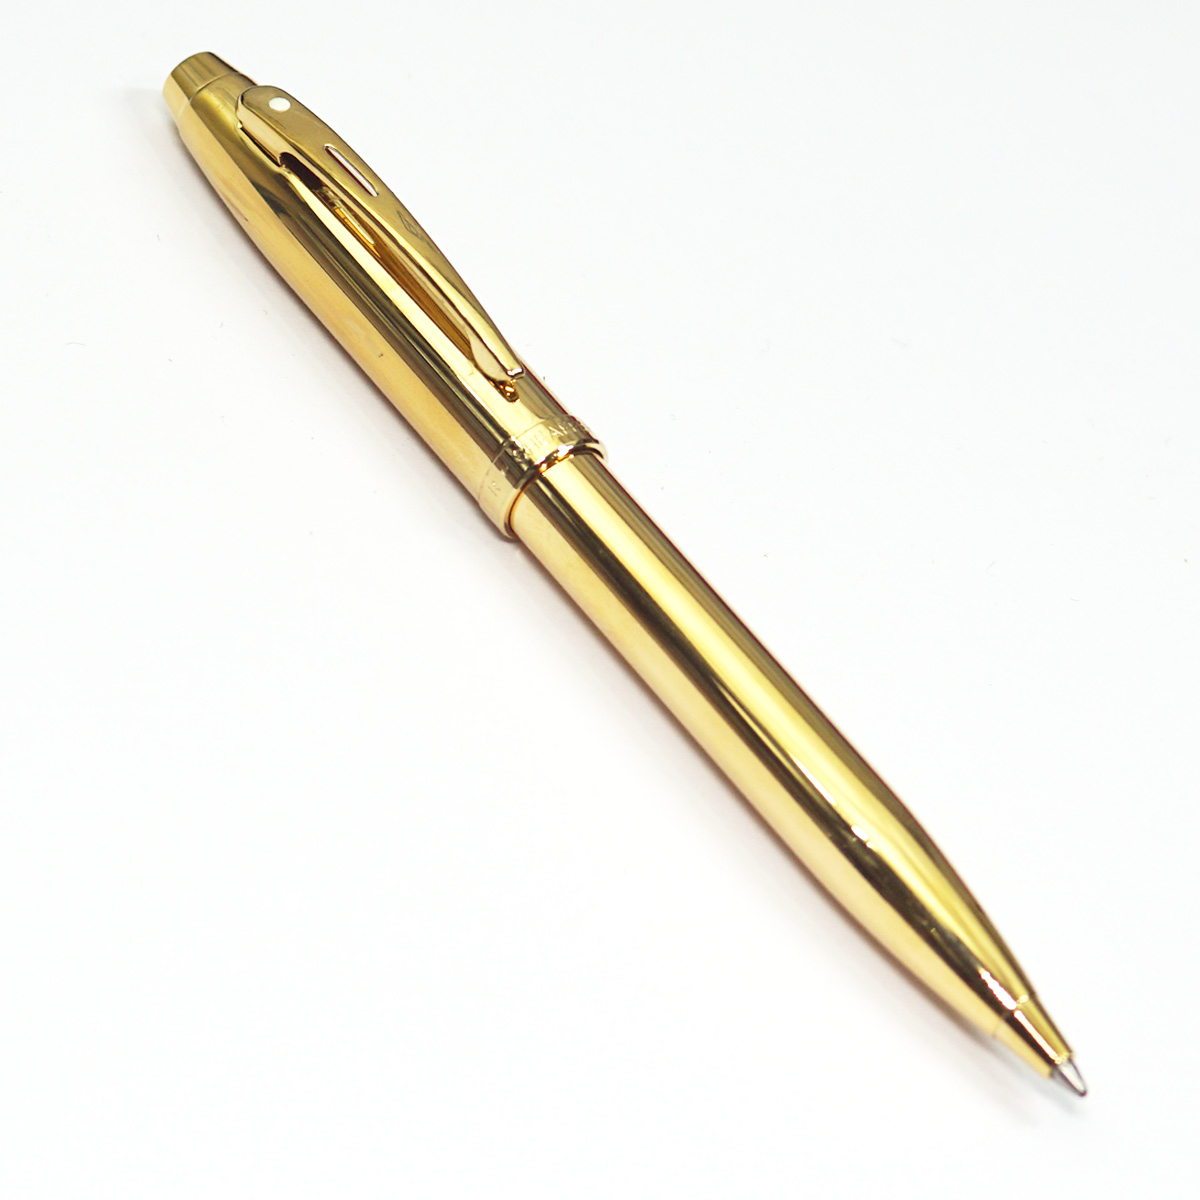 Sheaffer 100 9372 Full Glossy PVD Gold Color Body With Medium Tip Twist Type Ball Pen SKU 23279